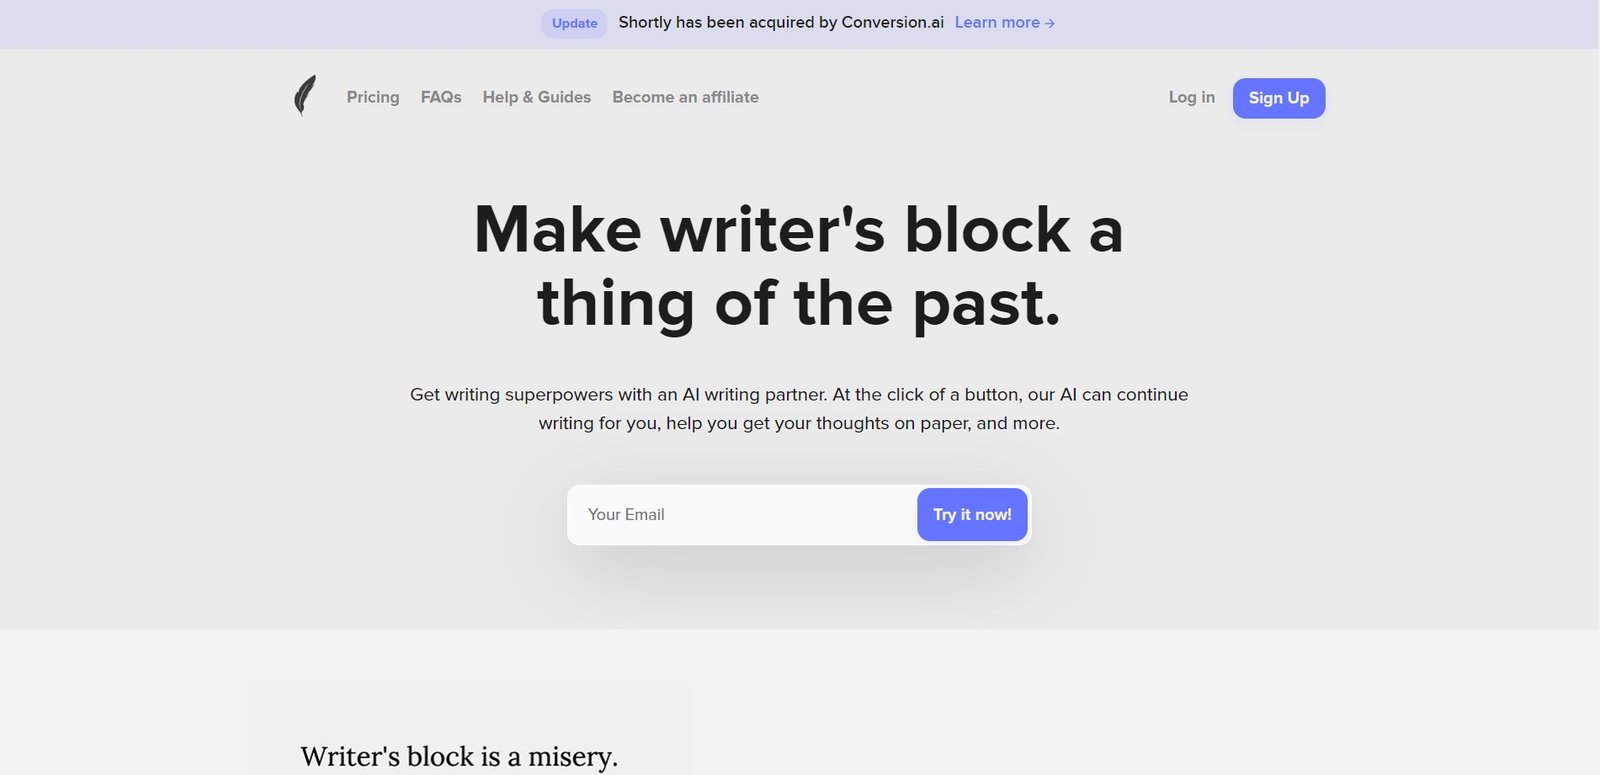 ShortlyAI is an AI writing assistant designed to help you overcome writer's block and boost your creativity